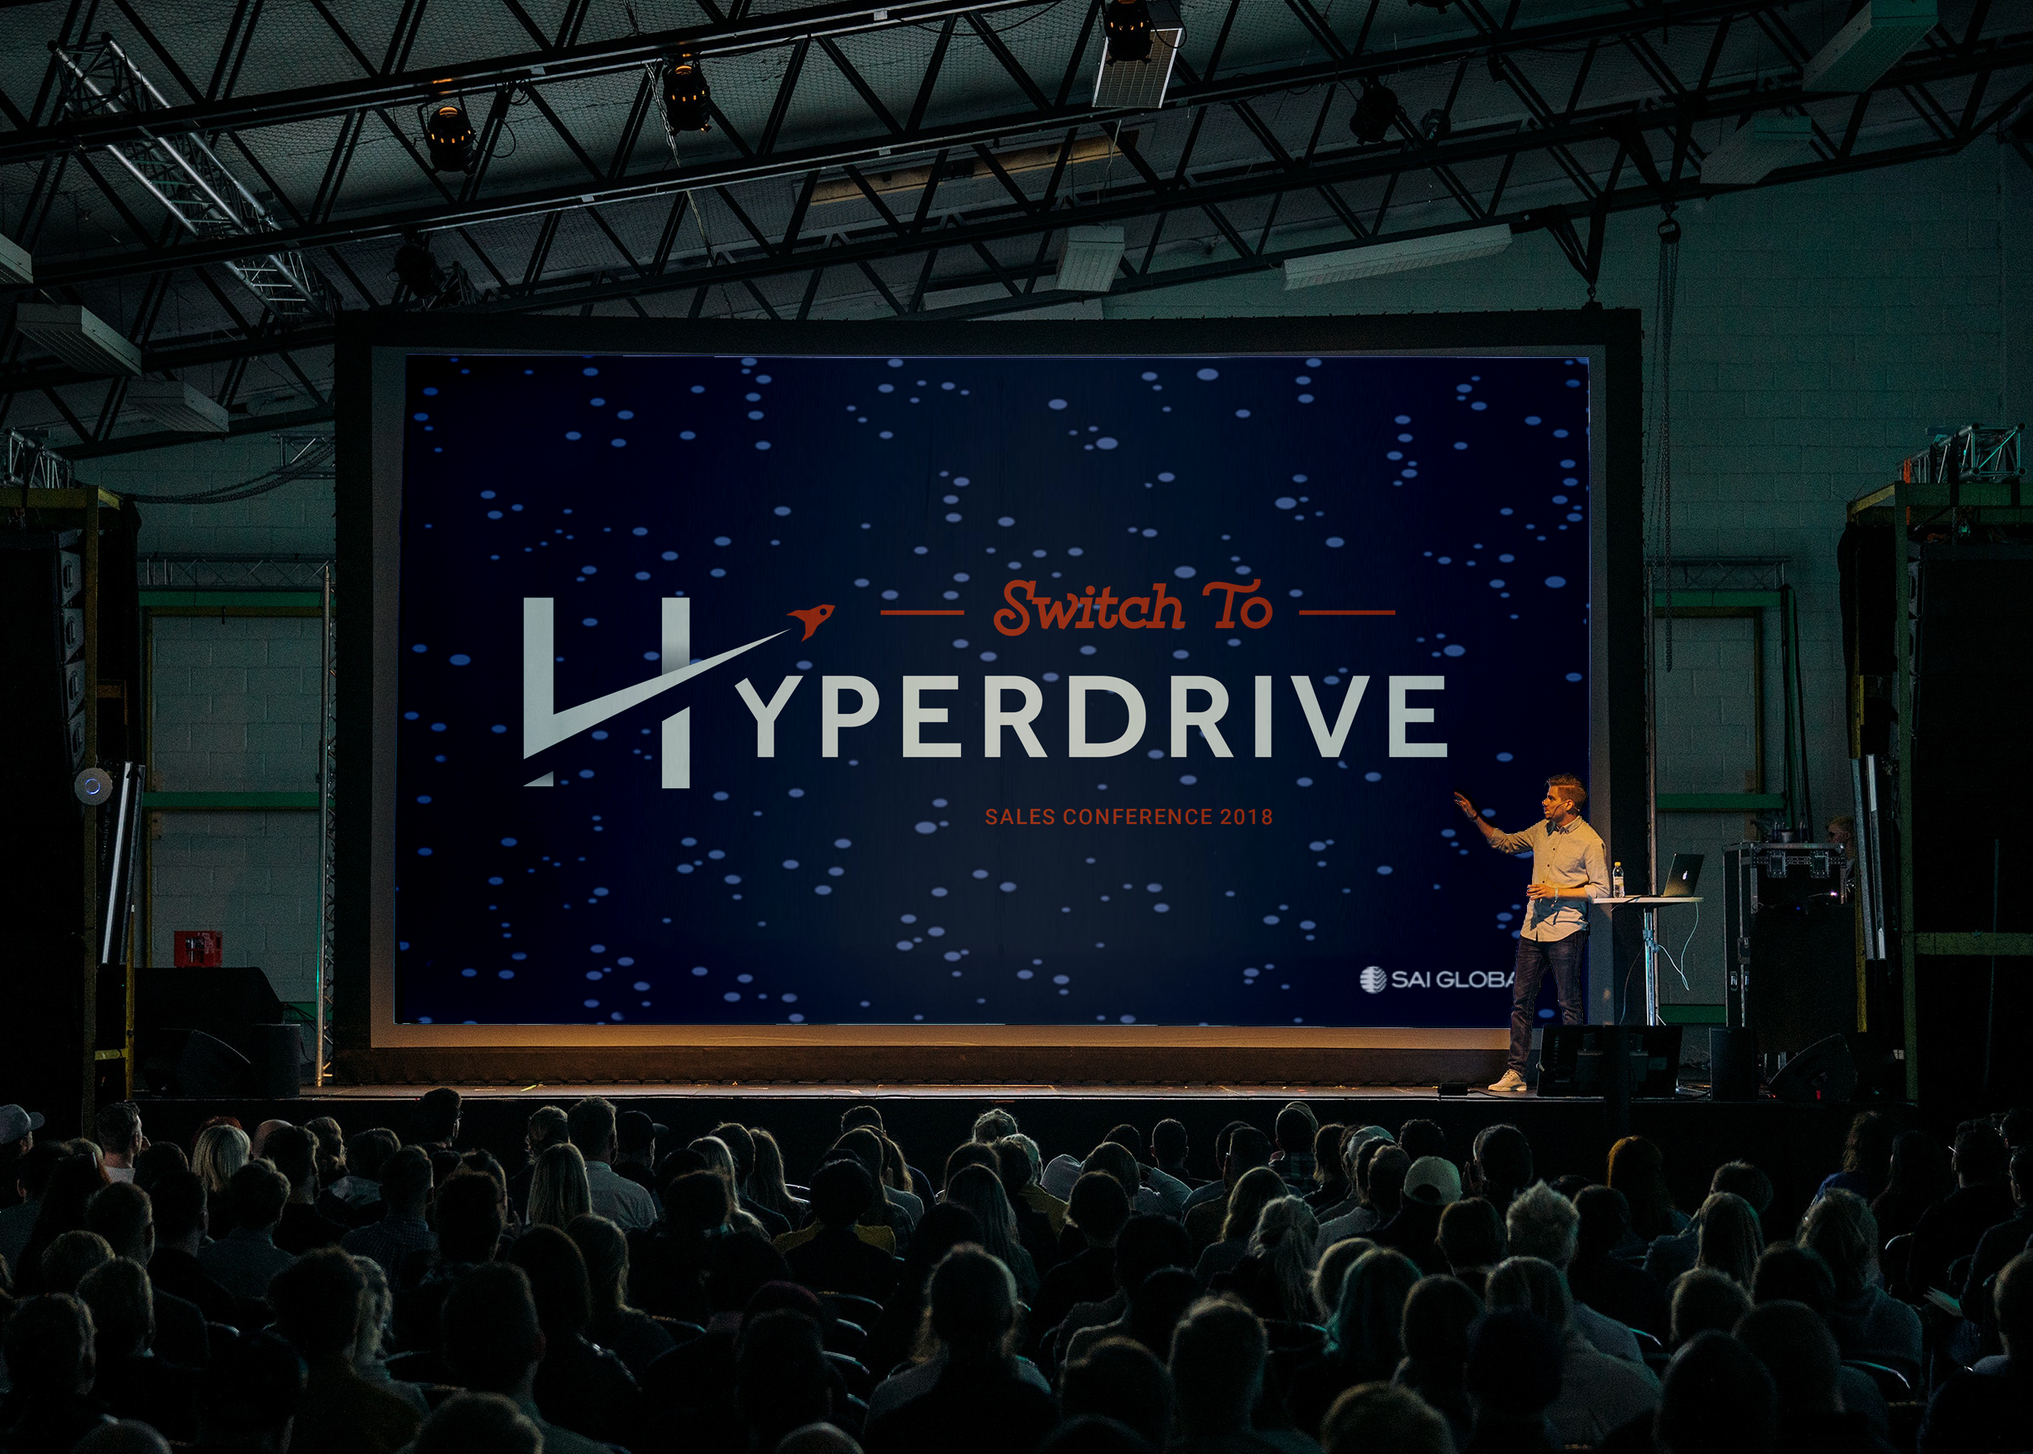 SAI Global Sales Conference in Australia: "Switch to Hyperdrive"